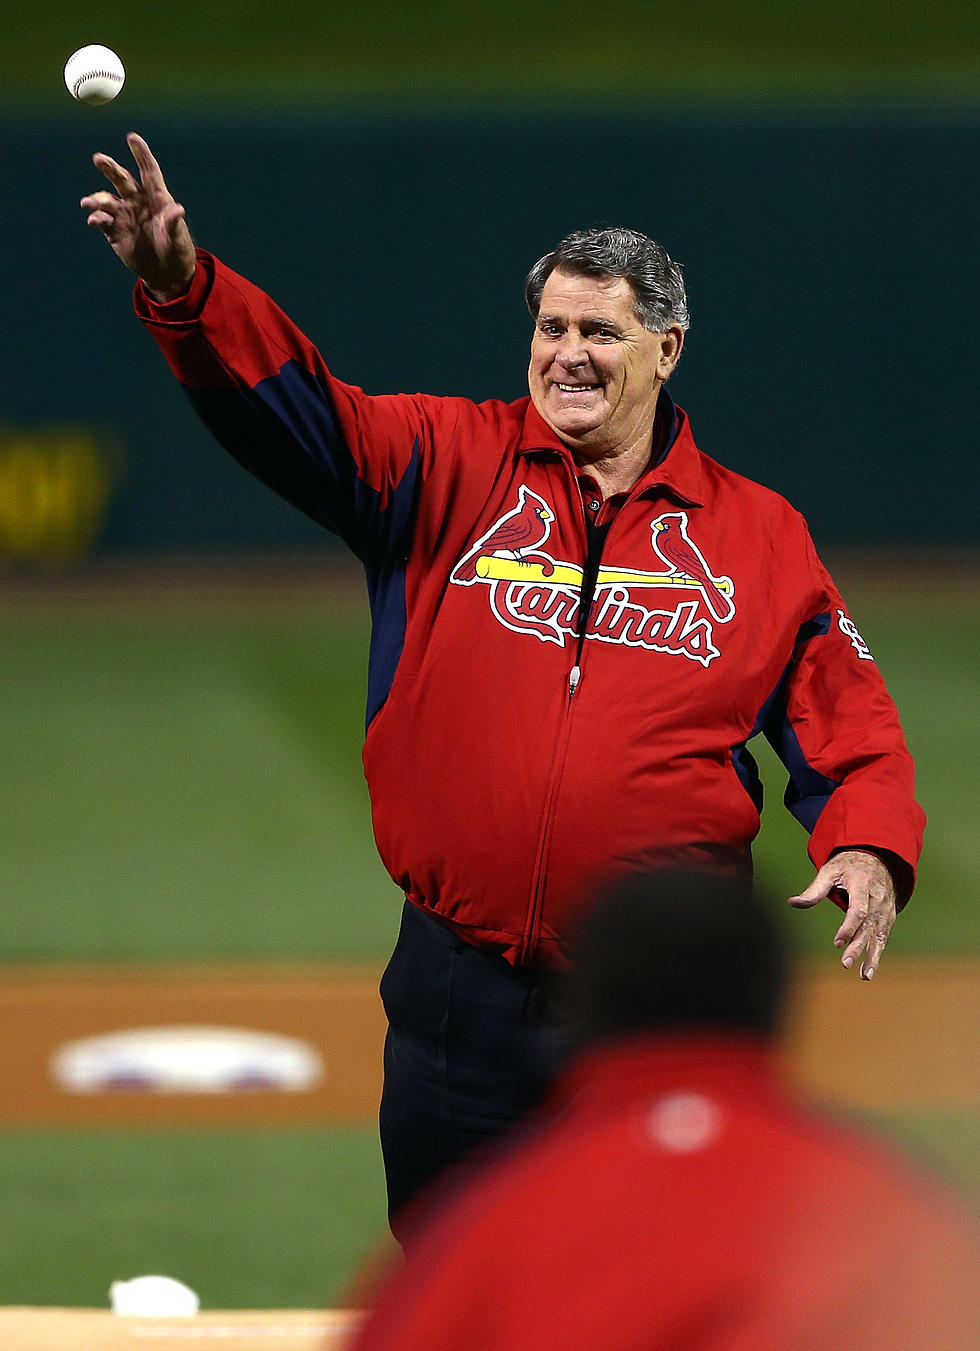 Interview With Cardinal Broadcaster Mike Shannon [Audio]